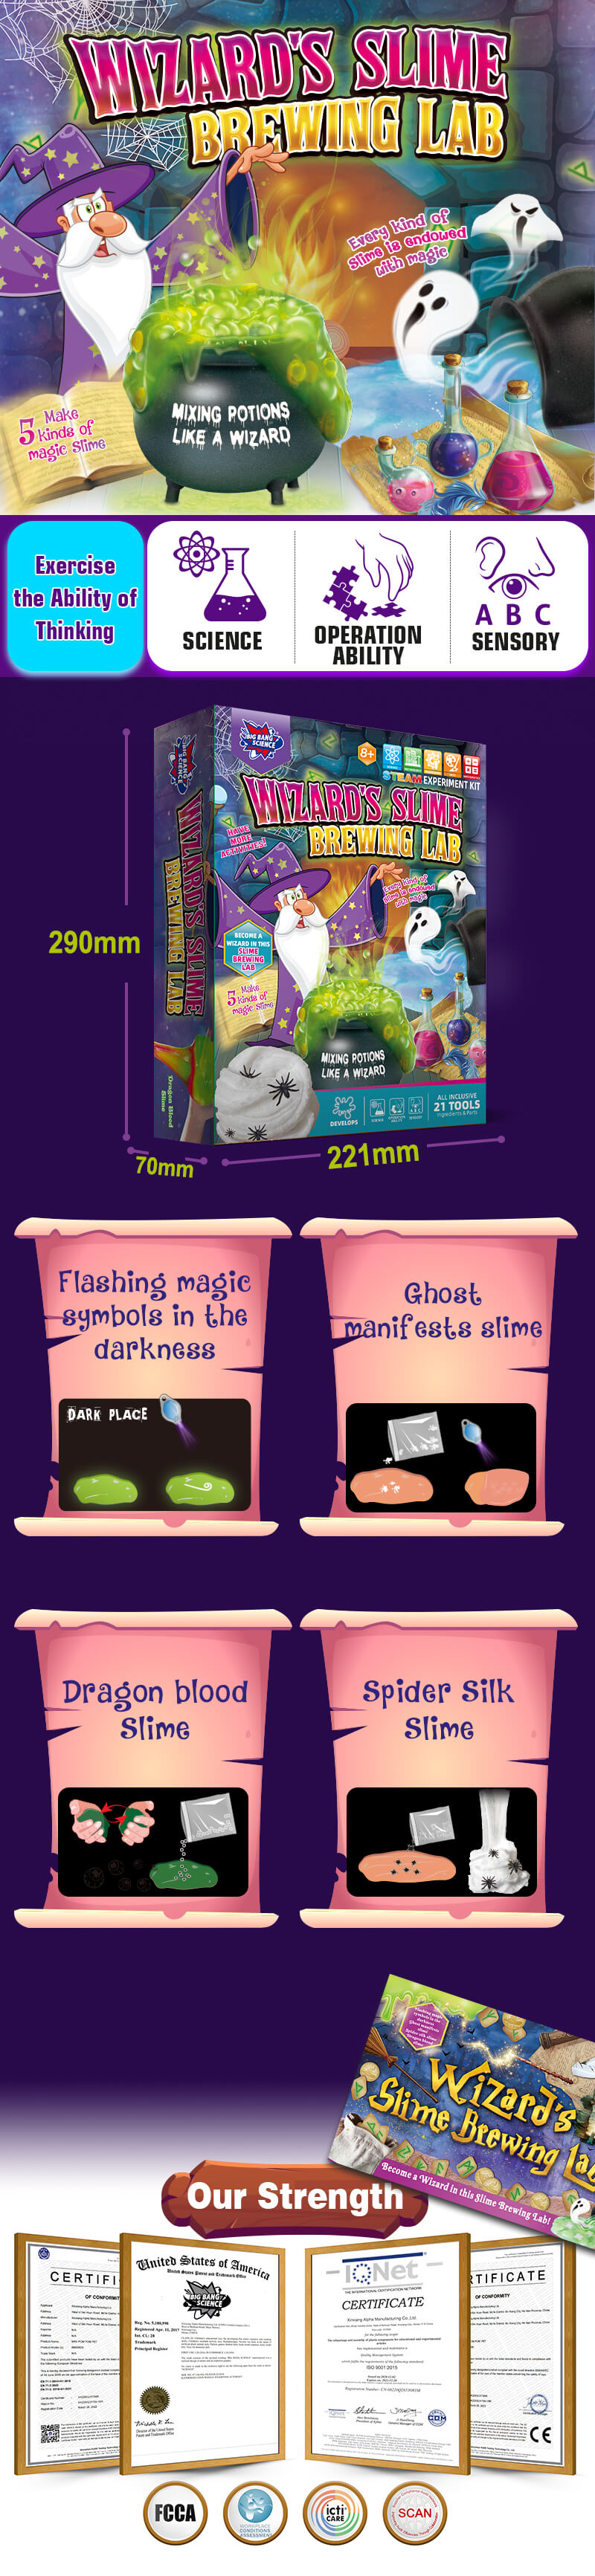 Wizard's-Slime-Brewing-Lab-Product-details-chart